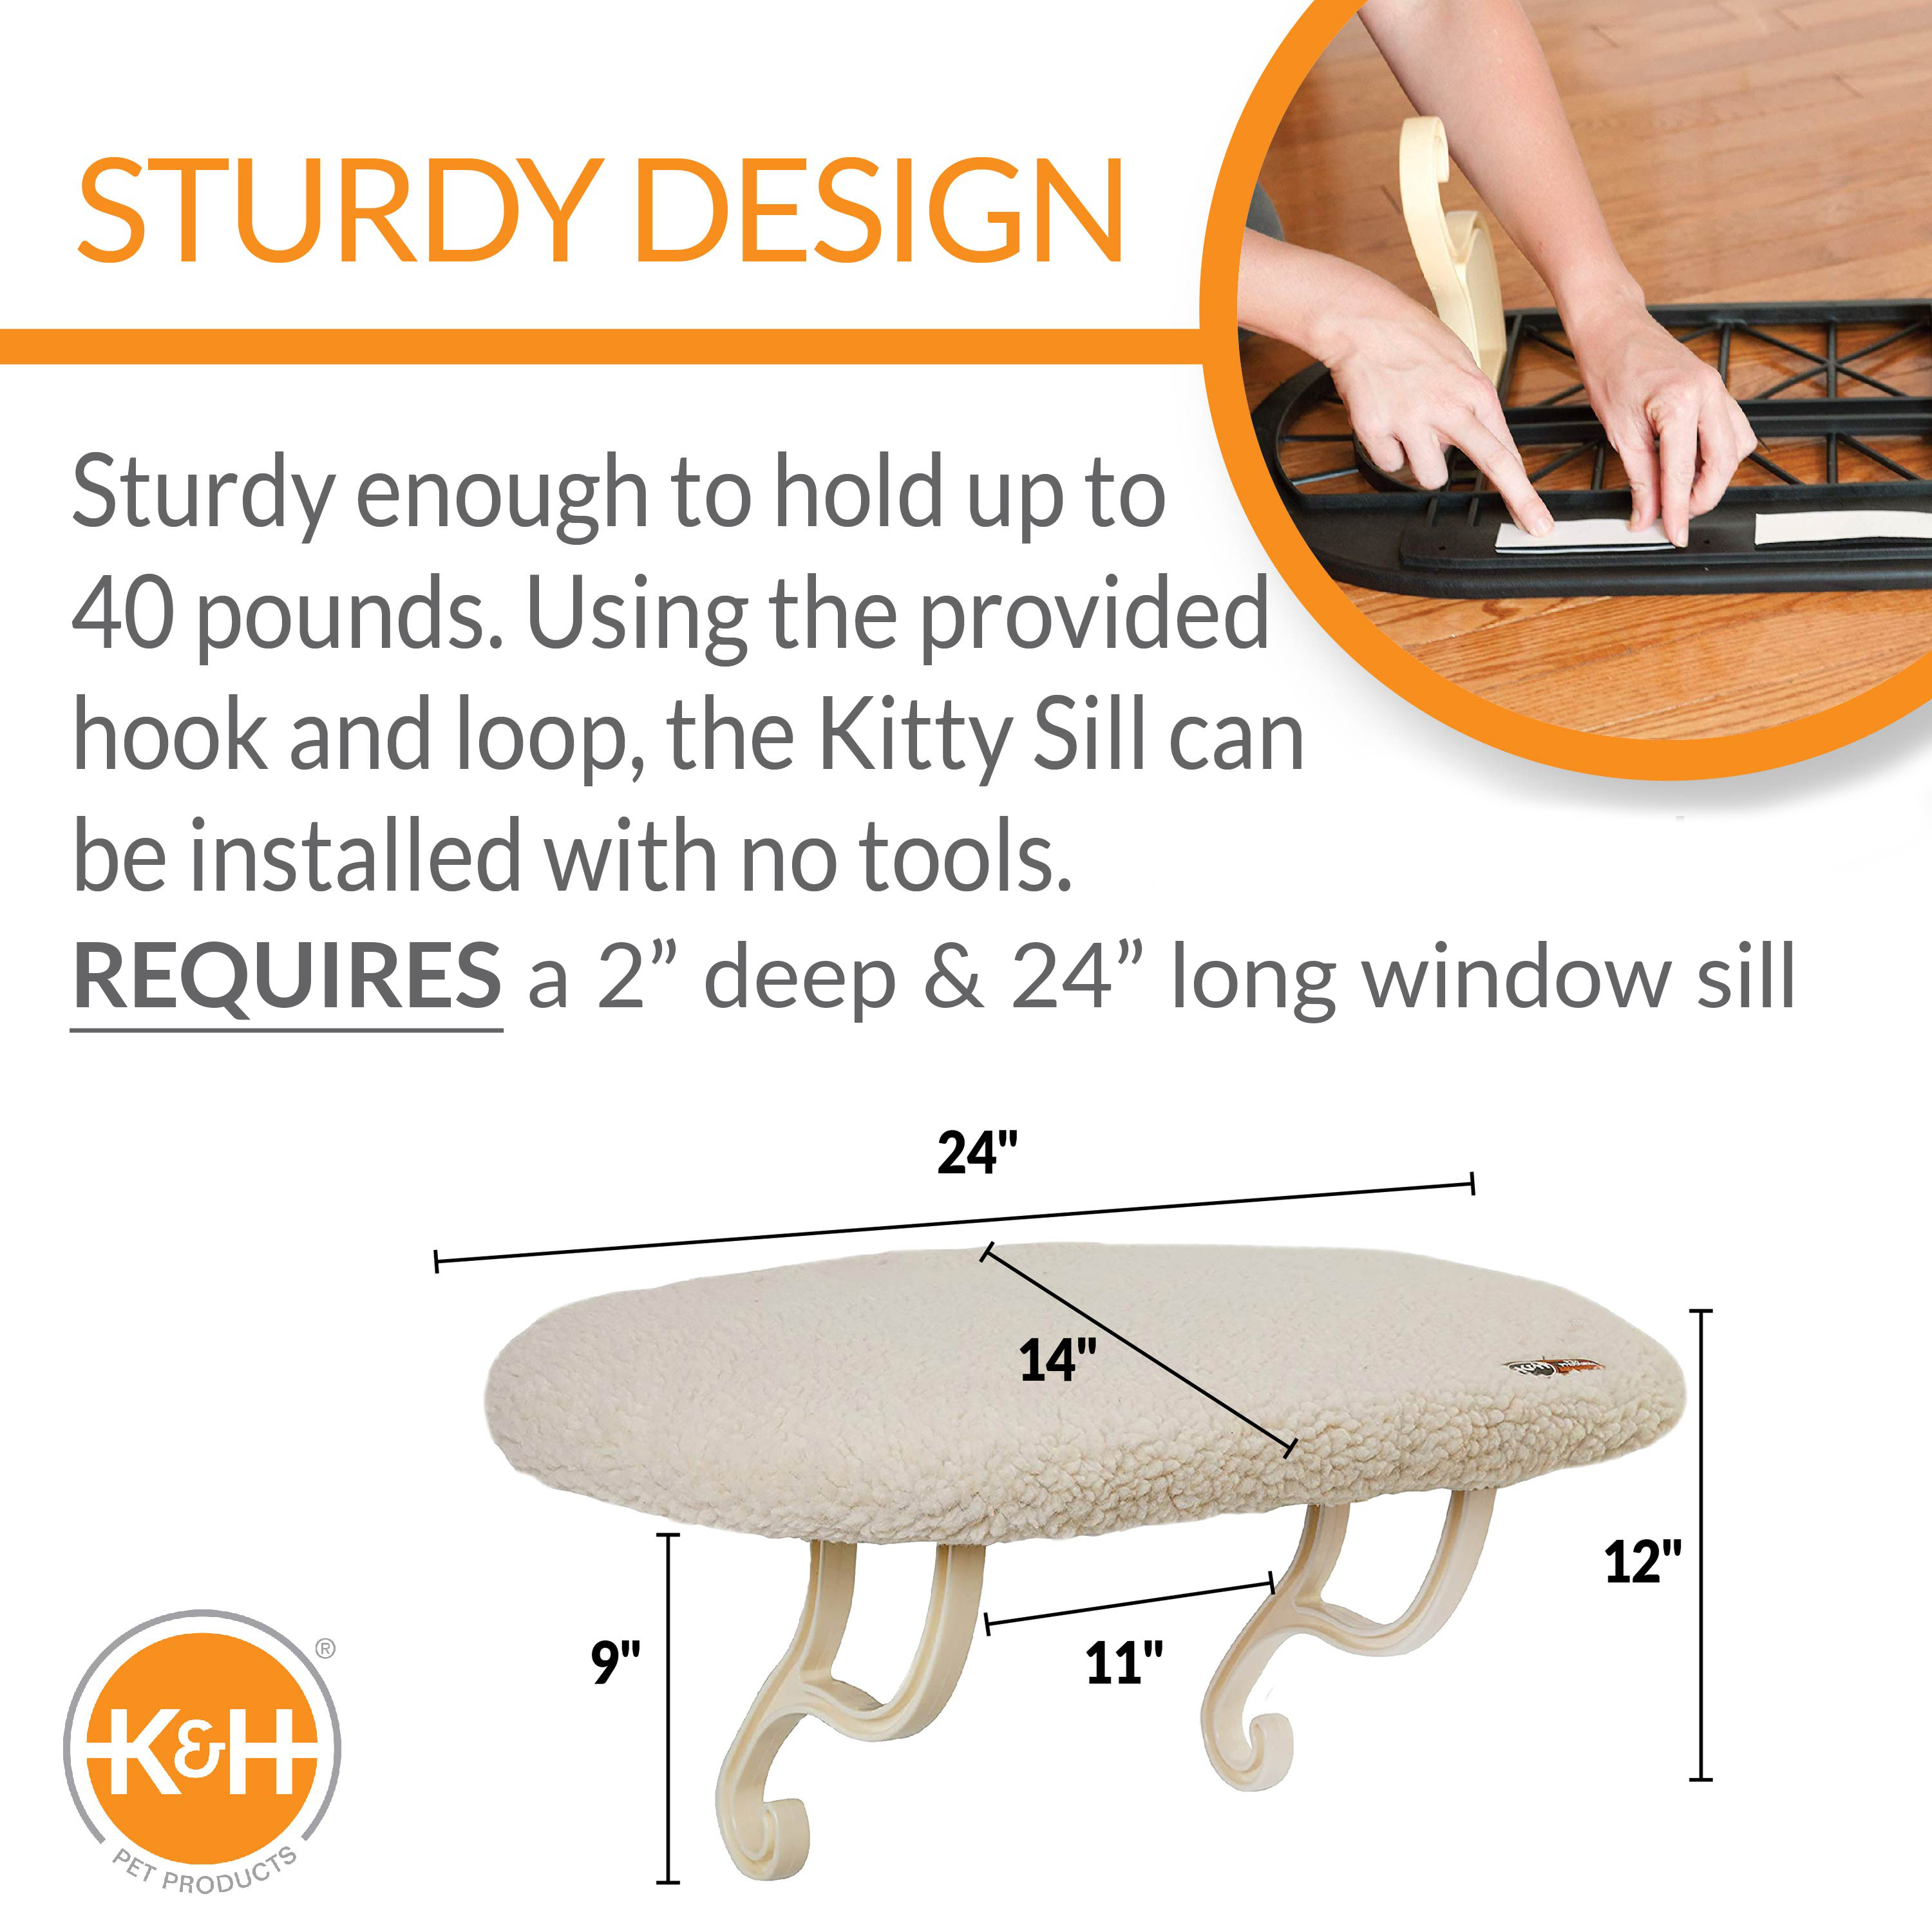 K&H Pet Products Kitty Sill Window Perch Seat with Washable Cover, 14 x24", Holds up to 40lbs, Unheated - image 3 of 10